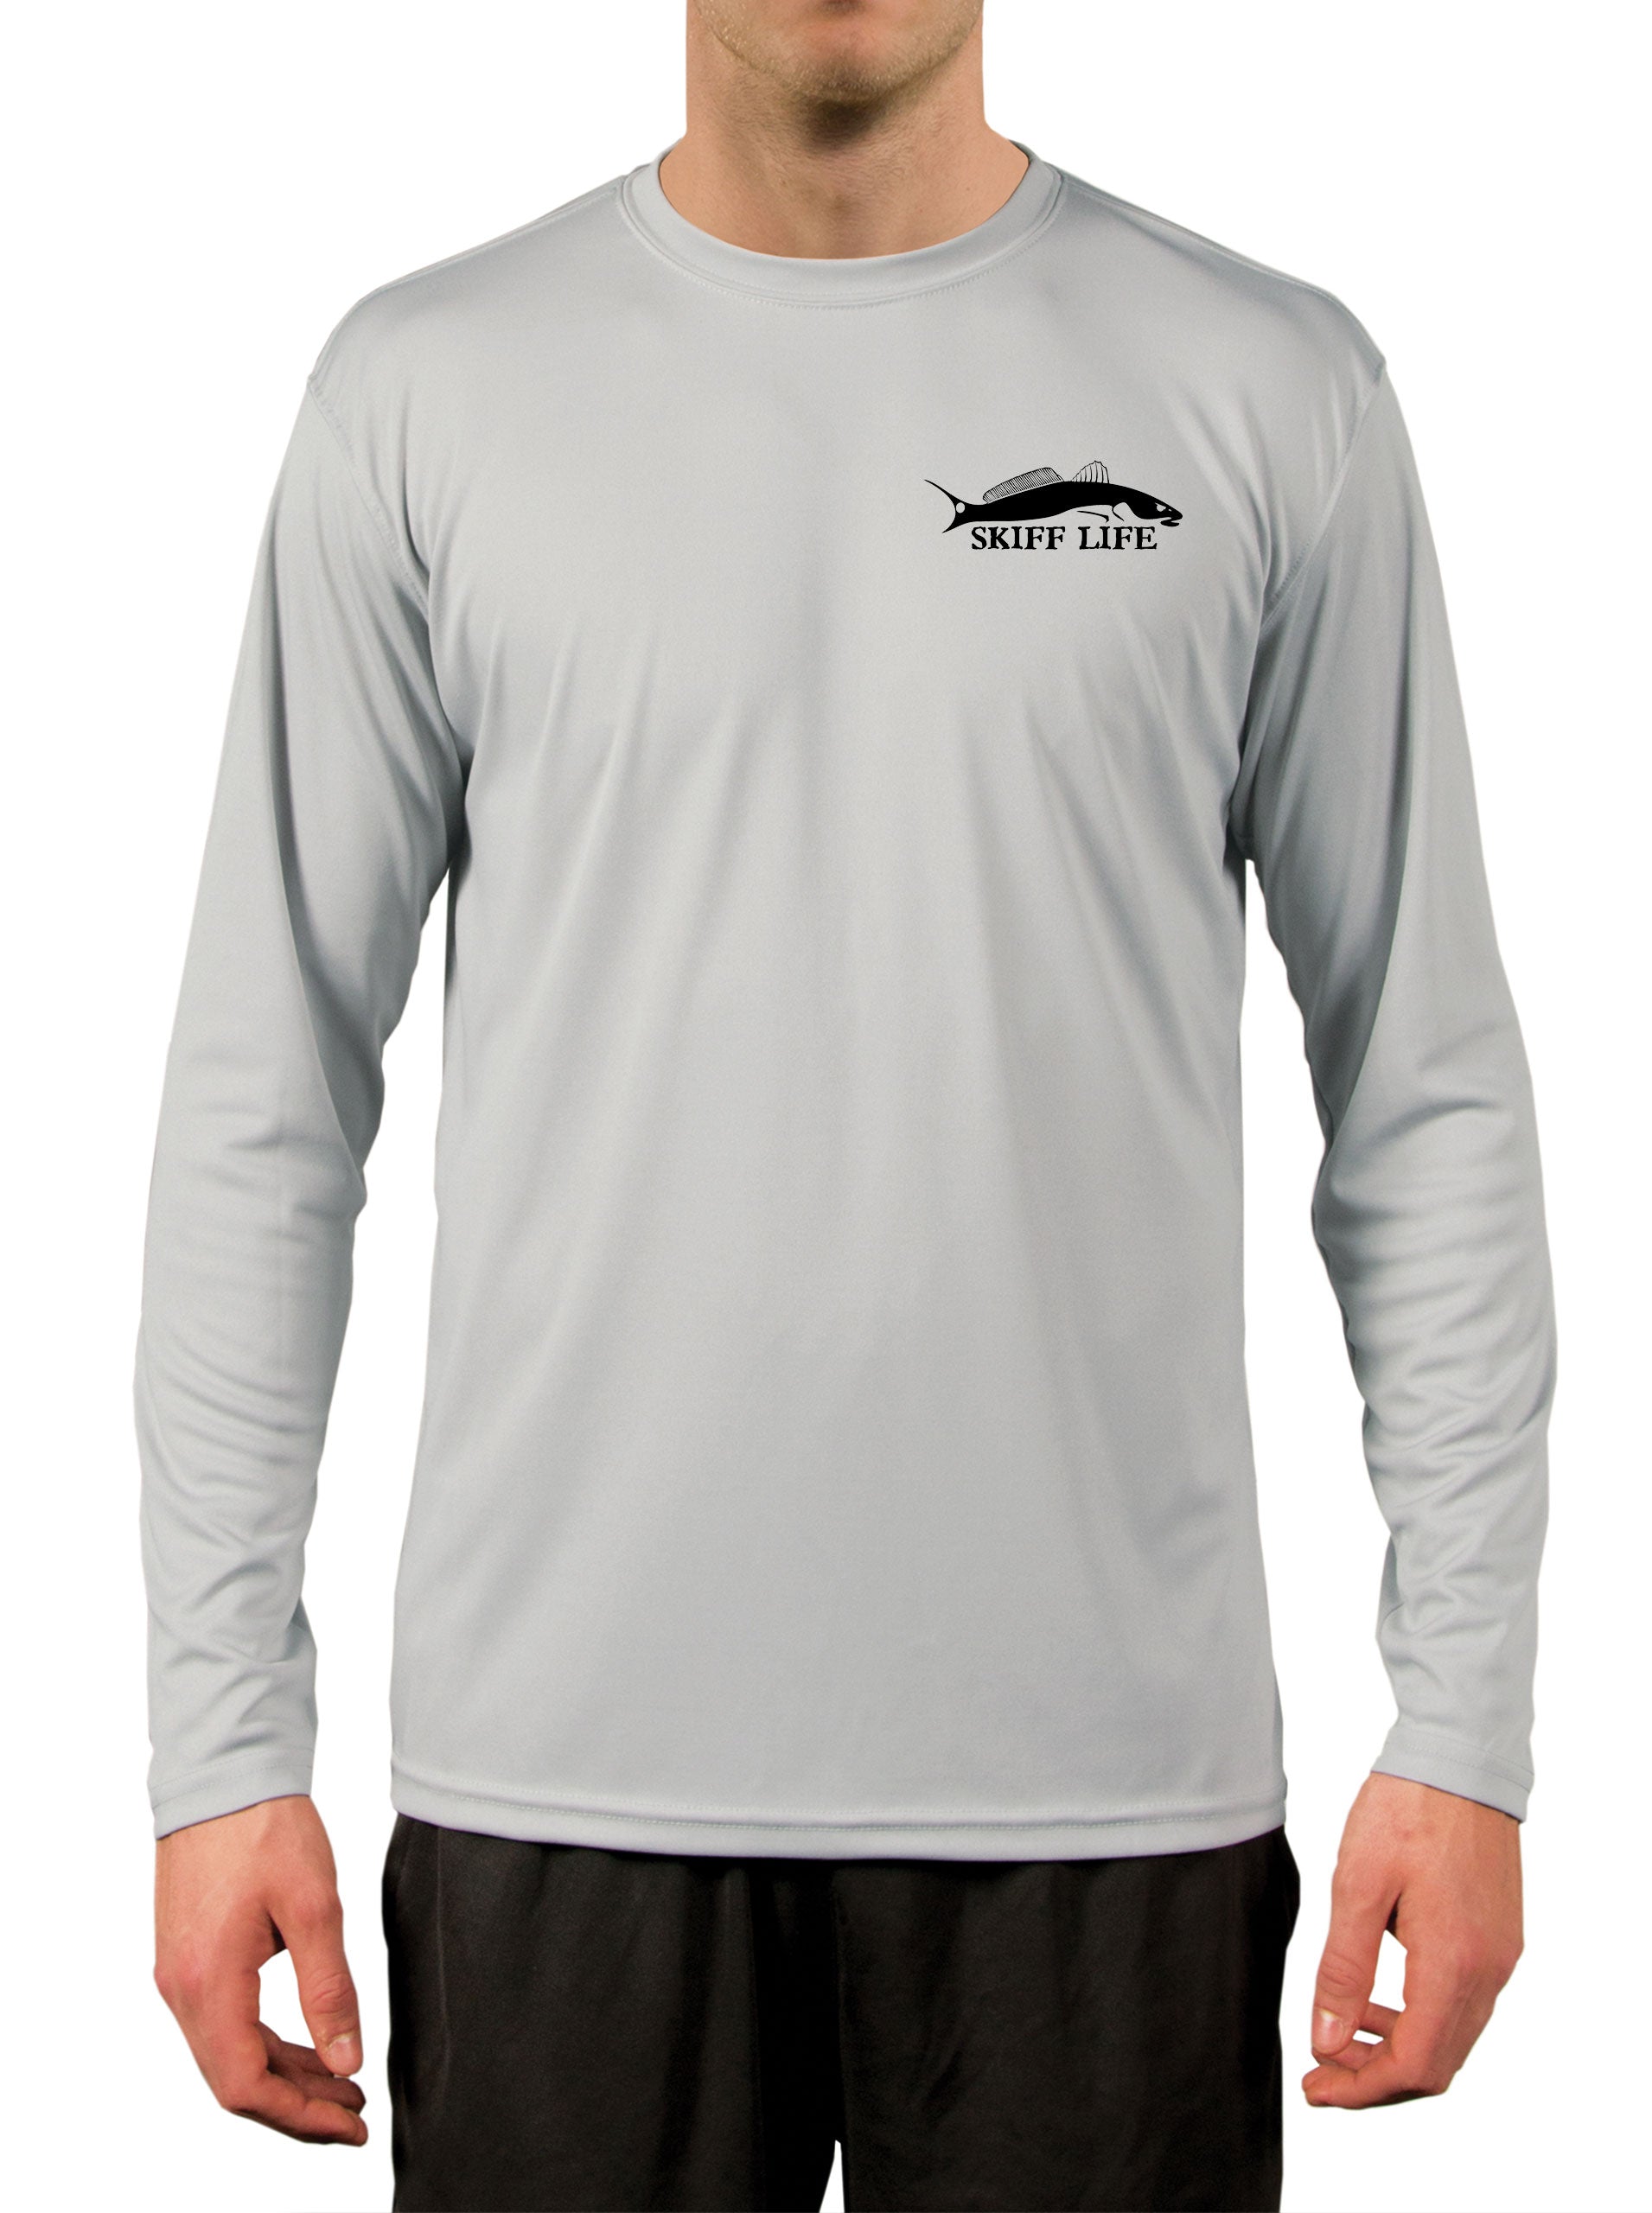 Flounder Fishing Shirts for Men Fluke - UV Protected +50 Sun Protection  with Moisture Wicking Technology